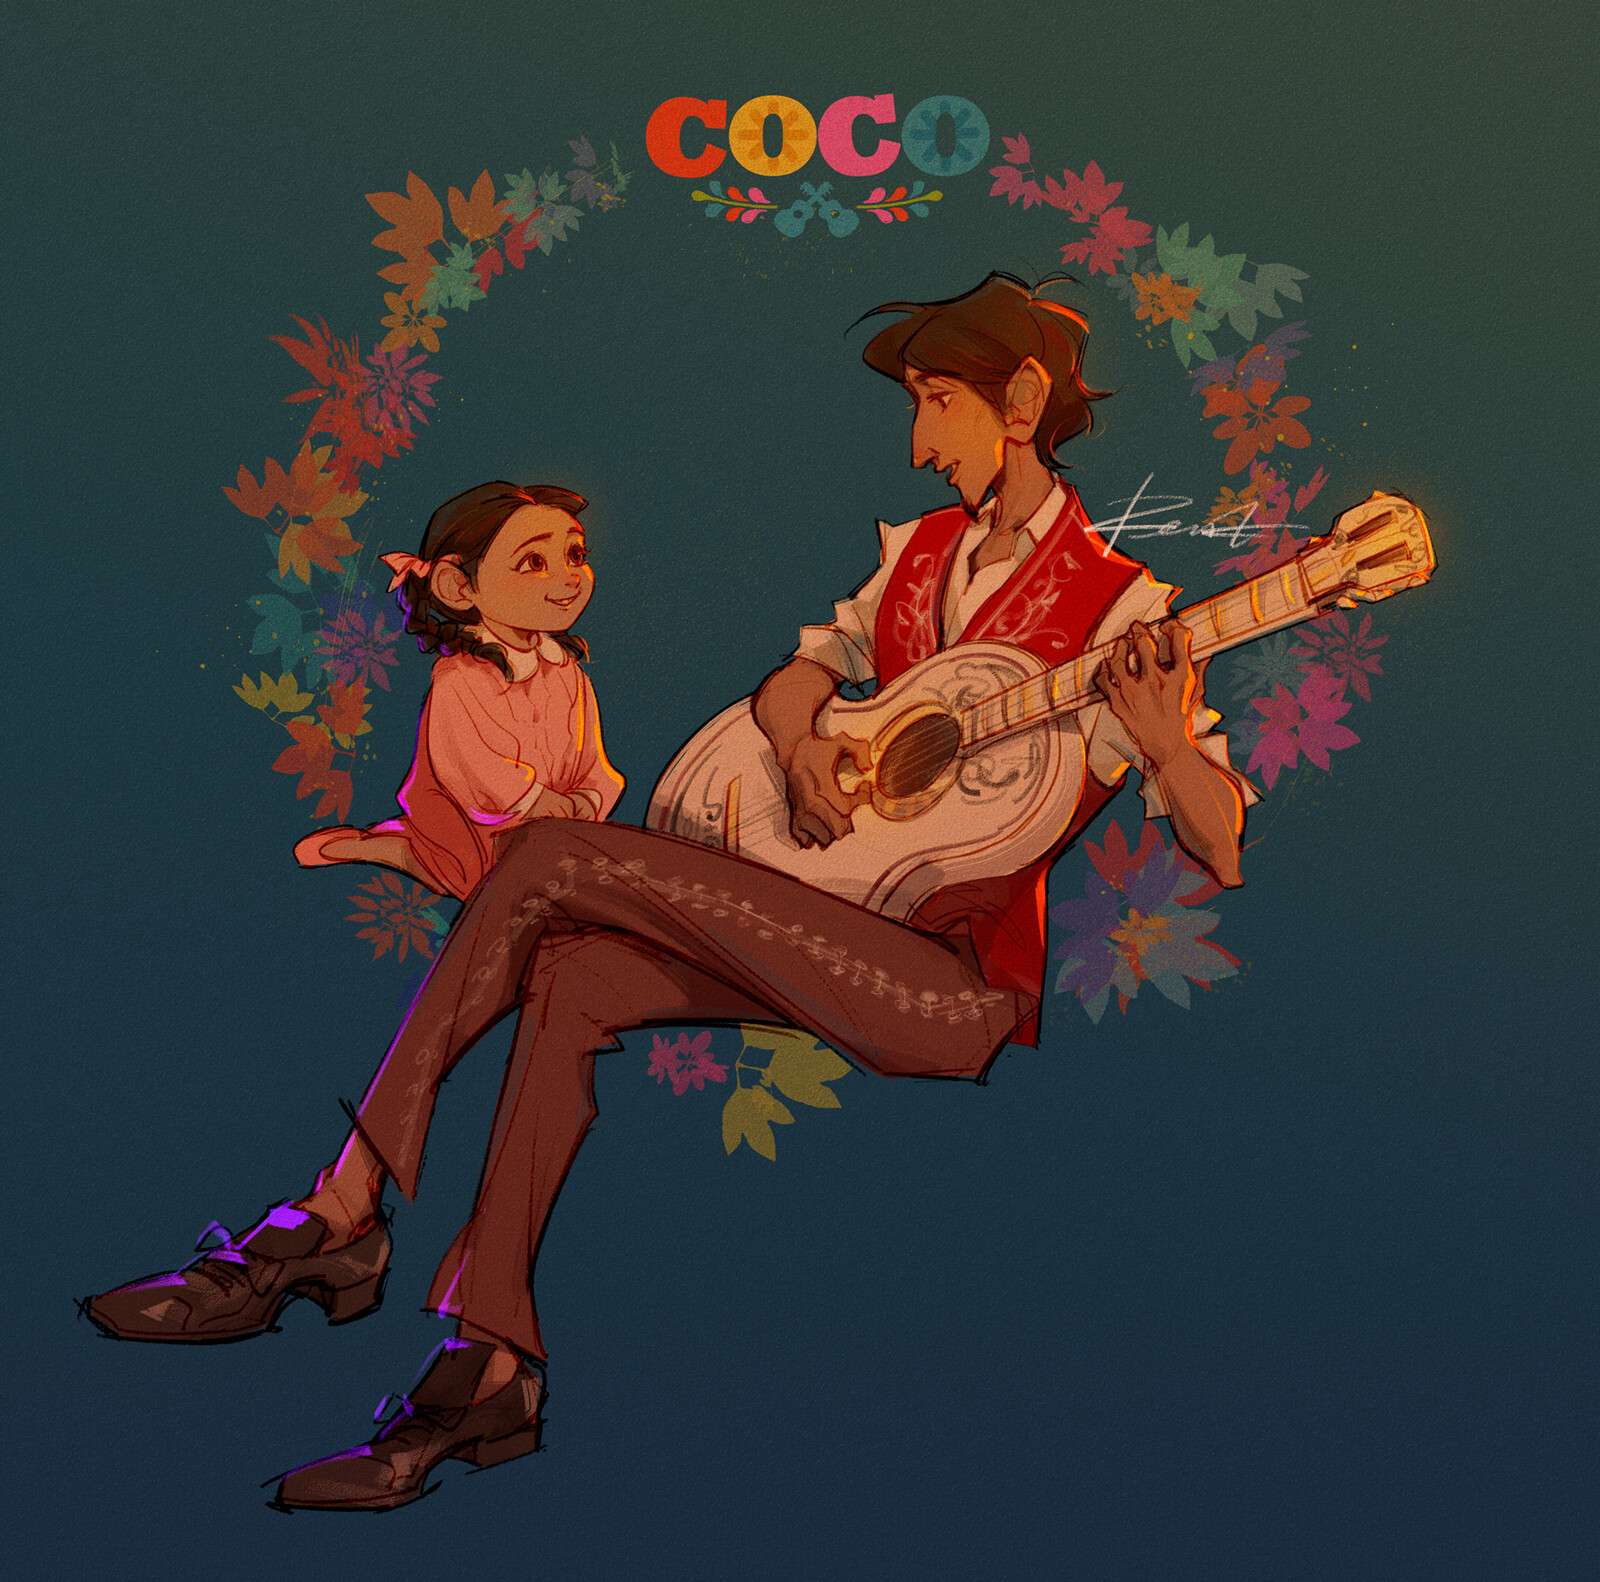 a fan art for the movie Coco.